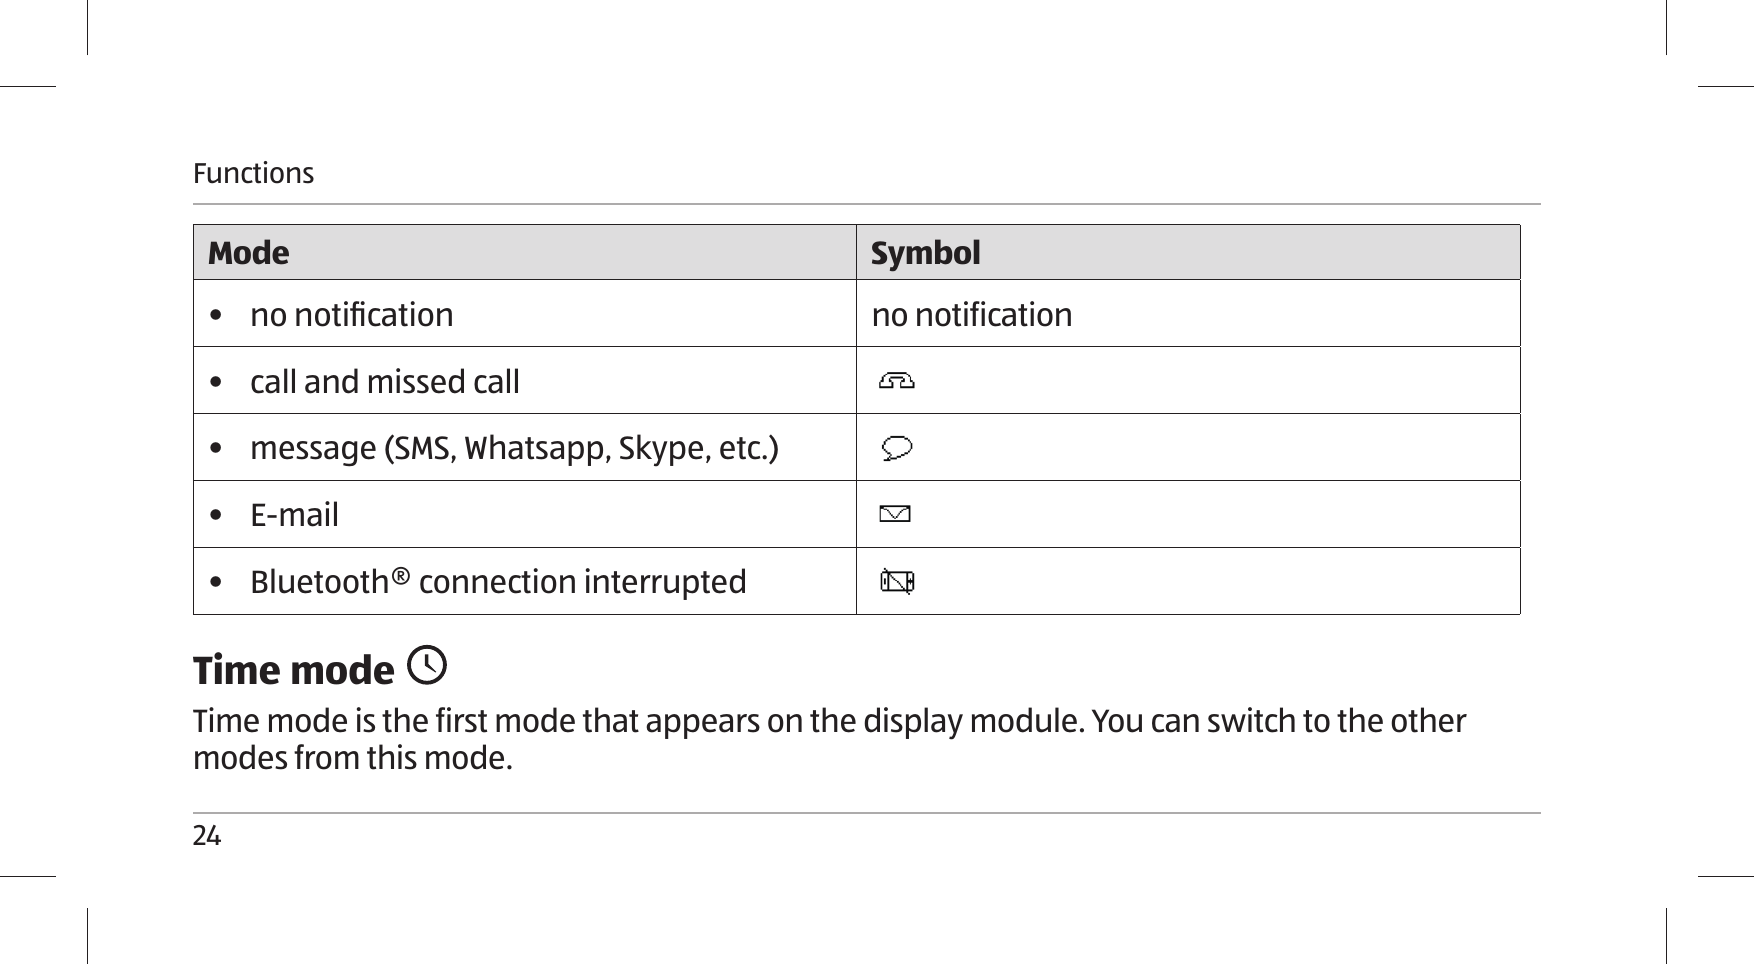 Functions24Mode Symbol•  no notiﬁcation no notification•  call and missed call•  message (SMS, Whatsapp, Skype, etc.)•  E-mail•  Bluetooth® connection interruptedTime mode Time mode is the first mode that appears on the display module. You can switch to the other modes from this mode. 